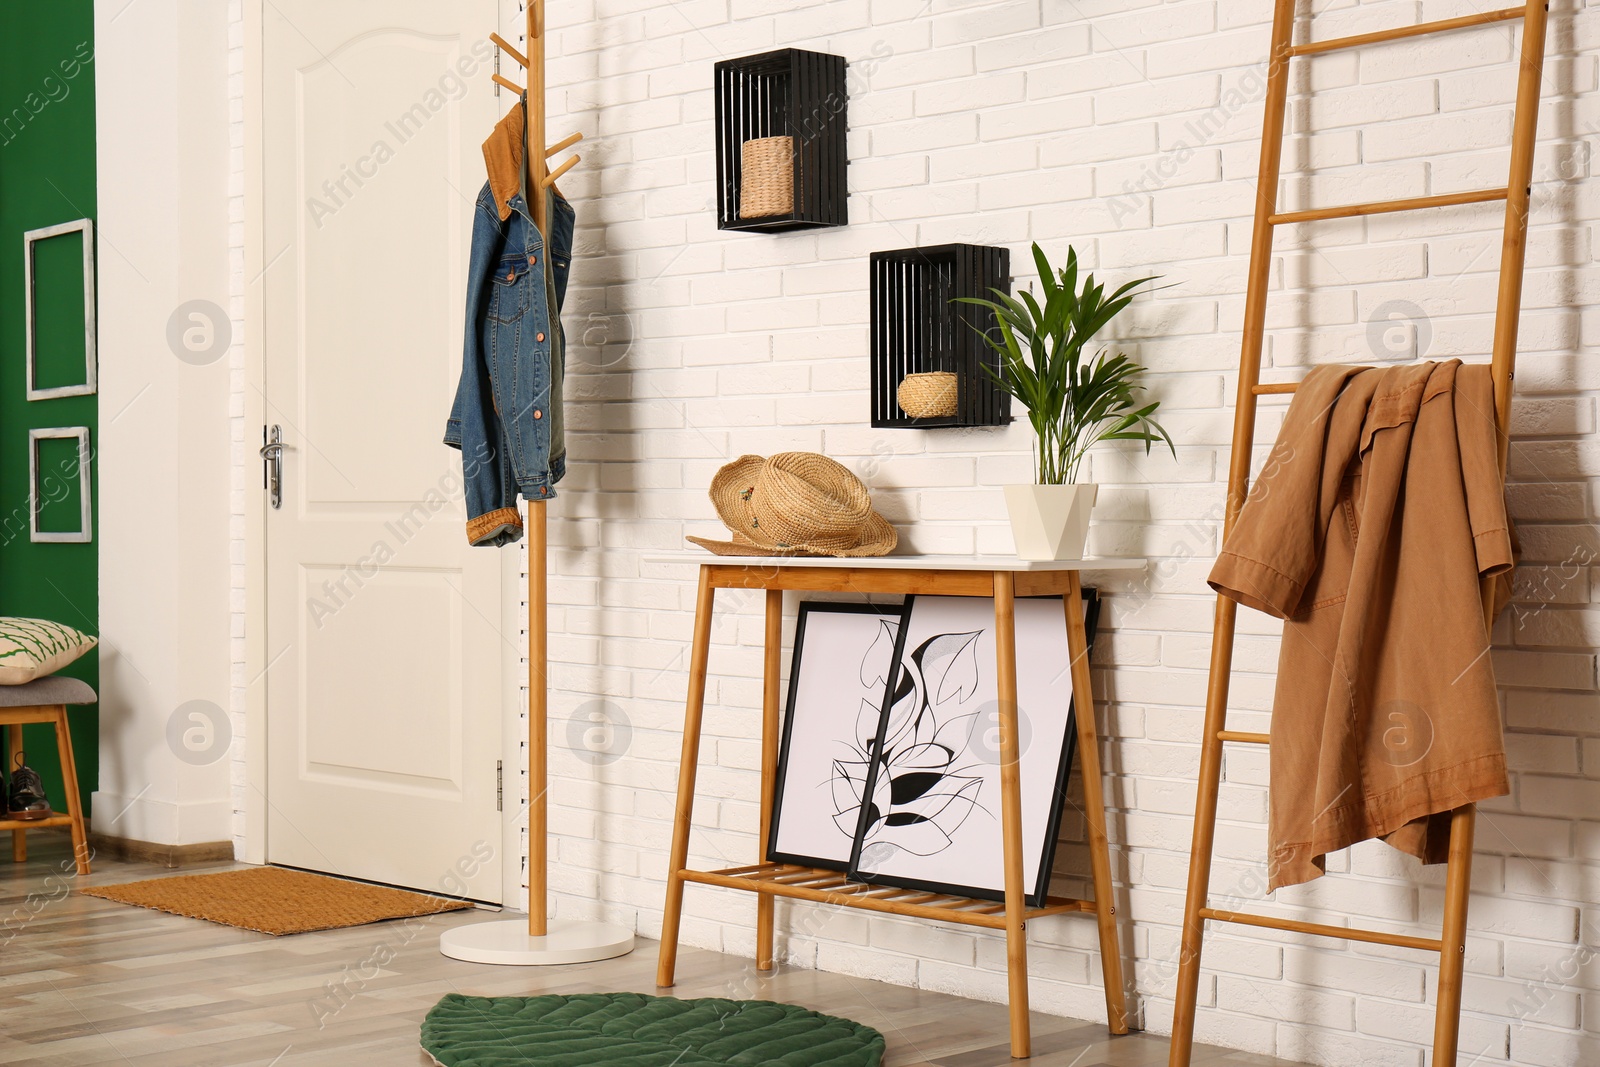 Photo of Stylish hallway interior with hanger stand, table and decorative wooden ladder